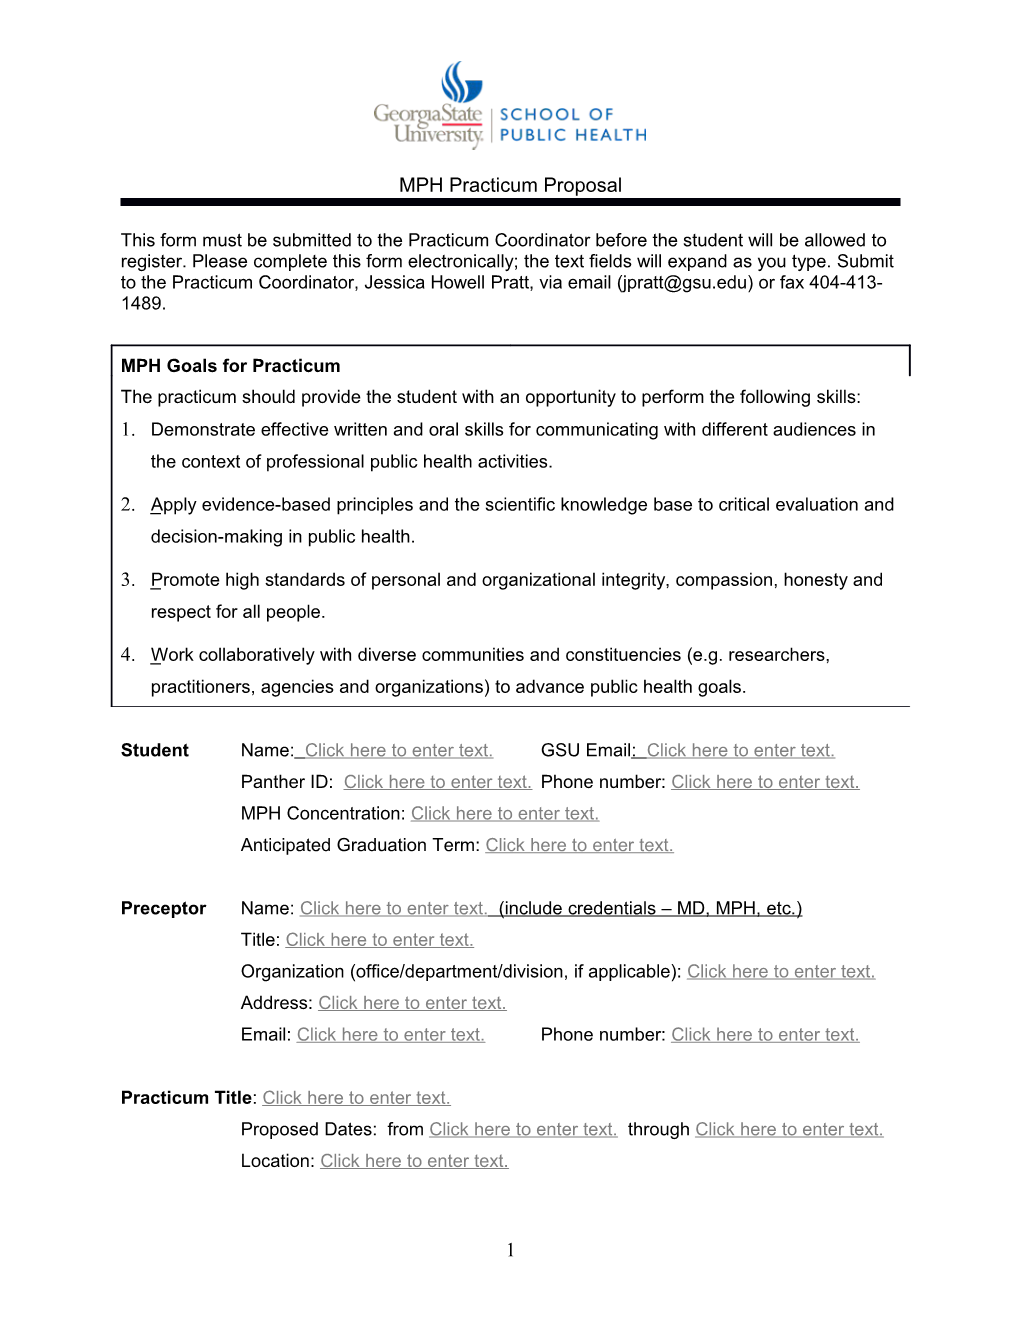 MPH Professional Experience Evaluation Form